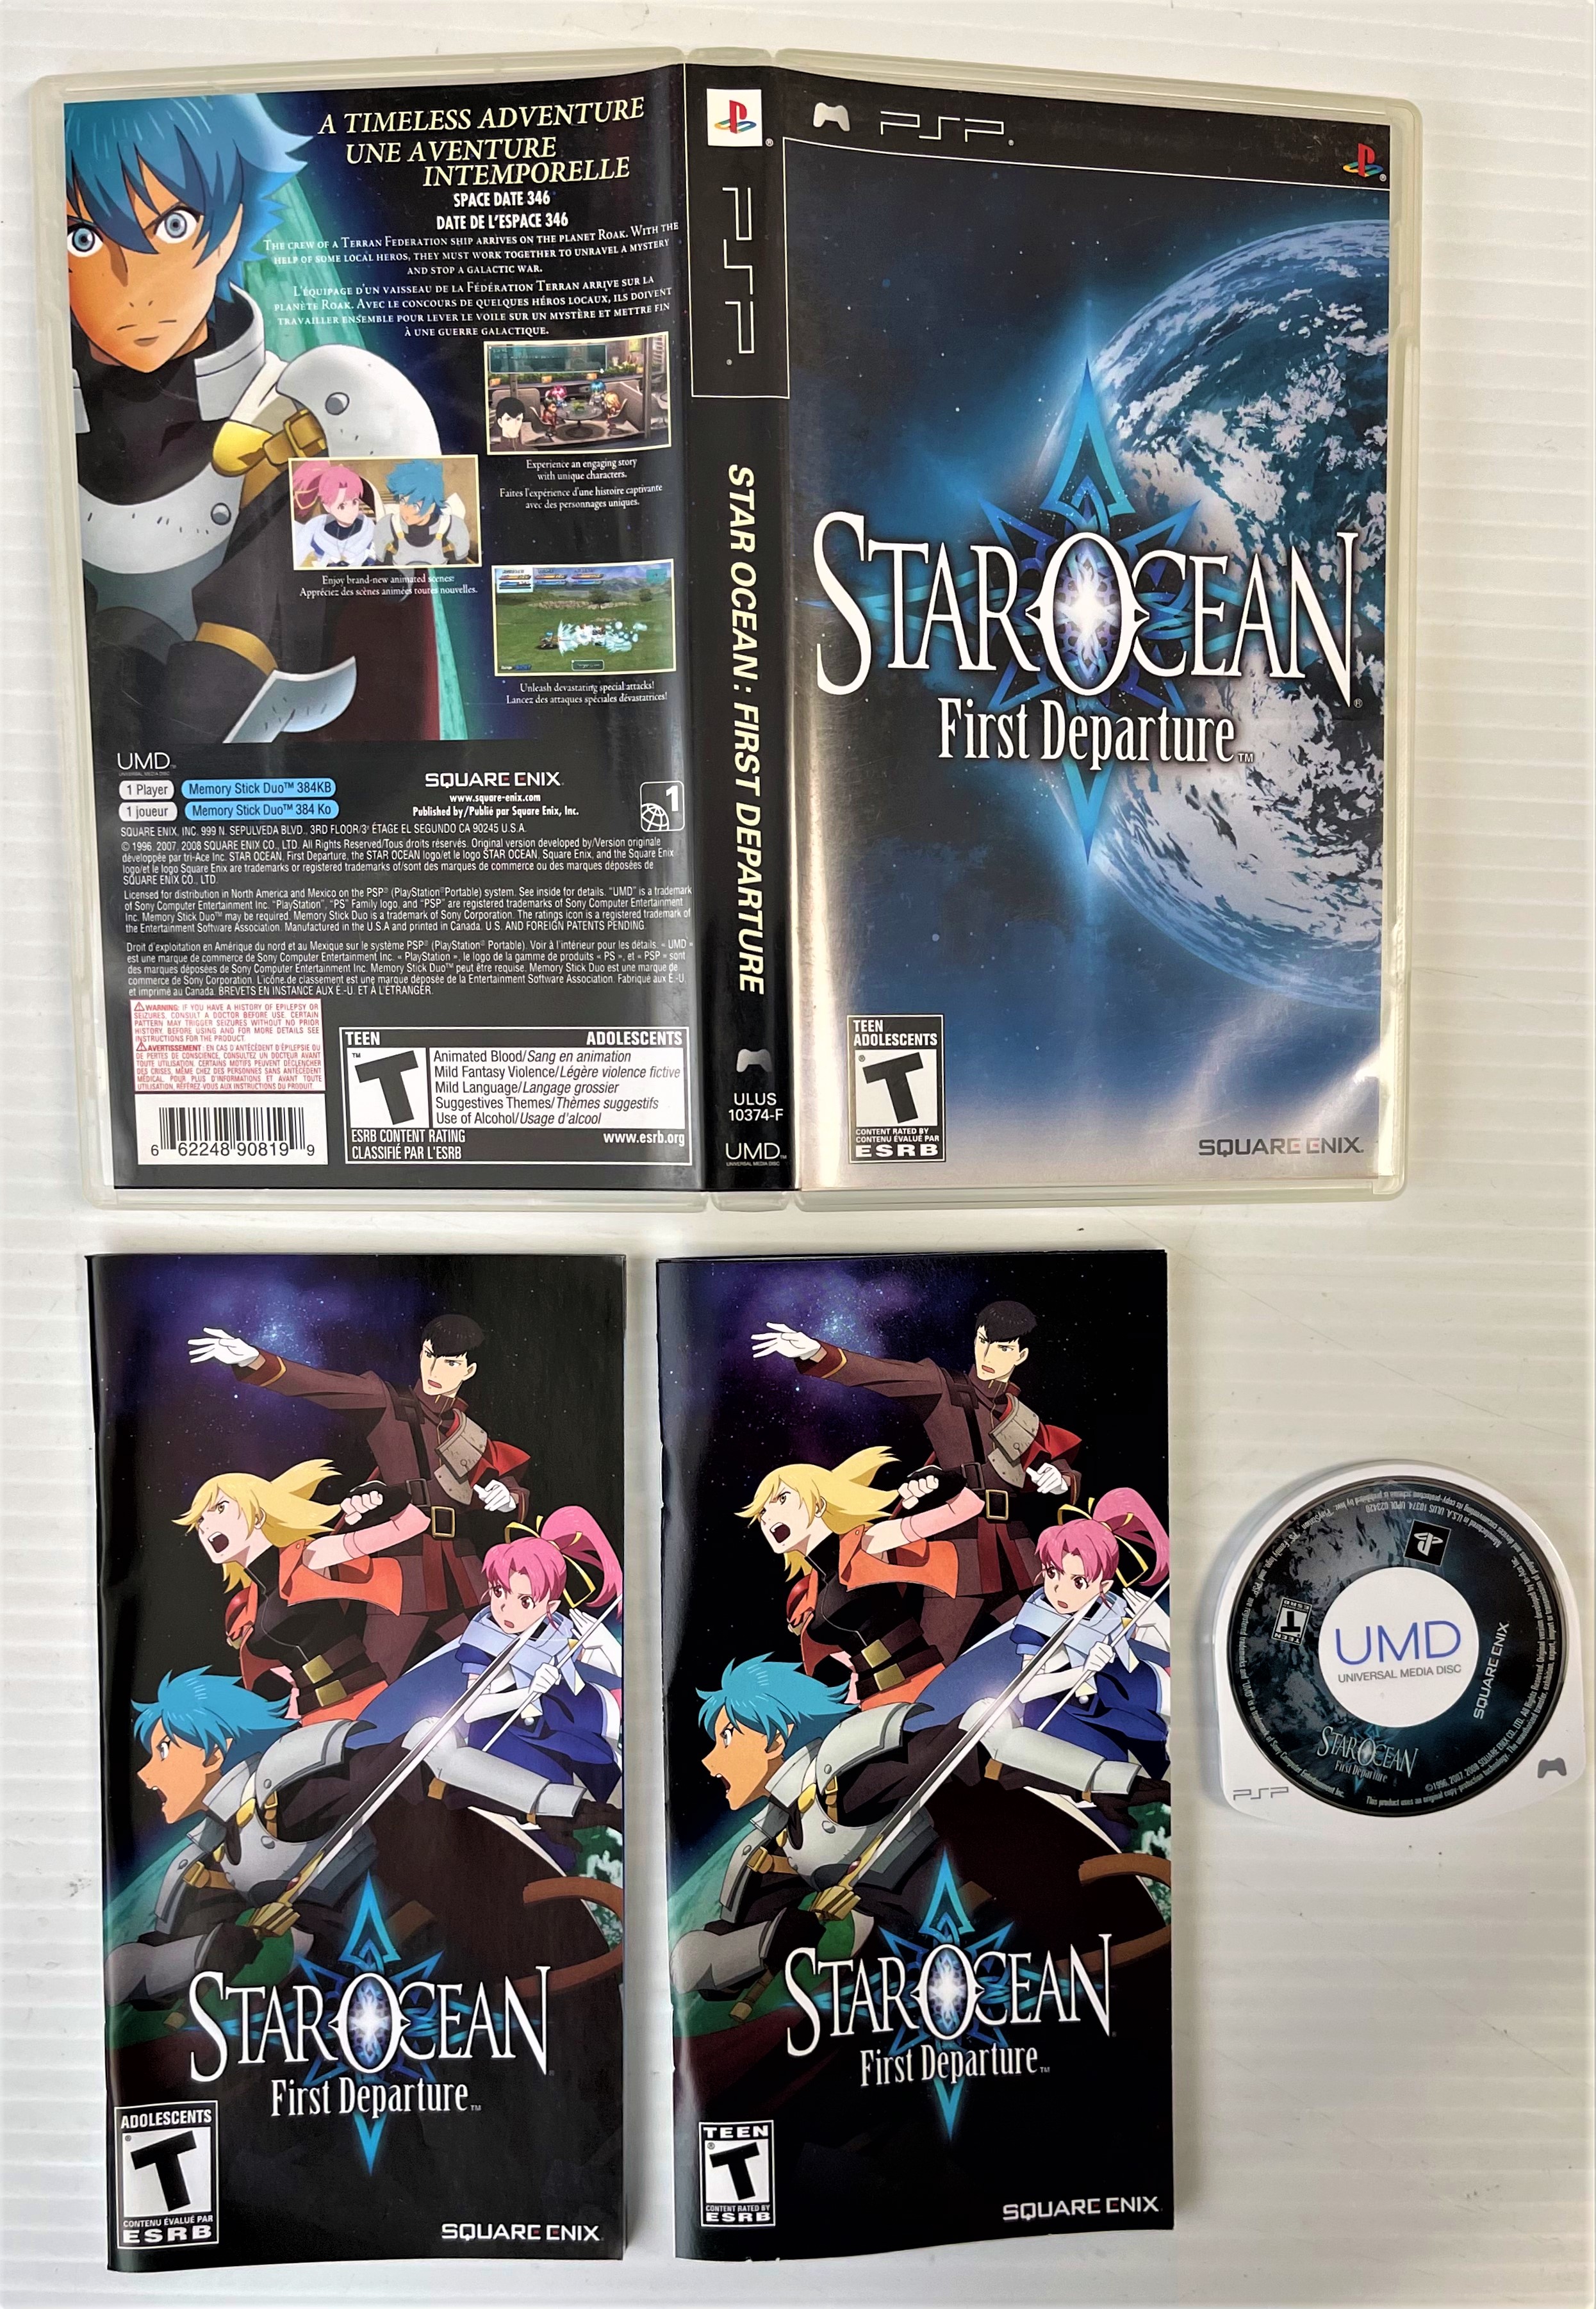 Star Ocean: First Departure for PSP